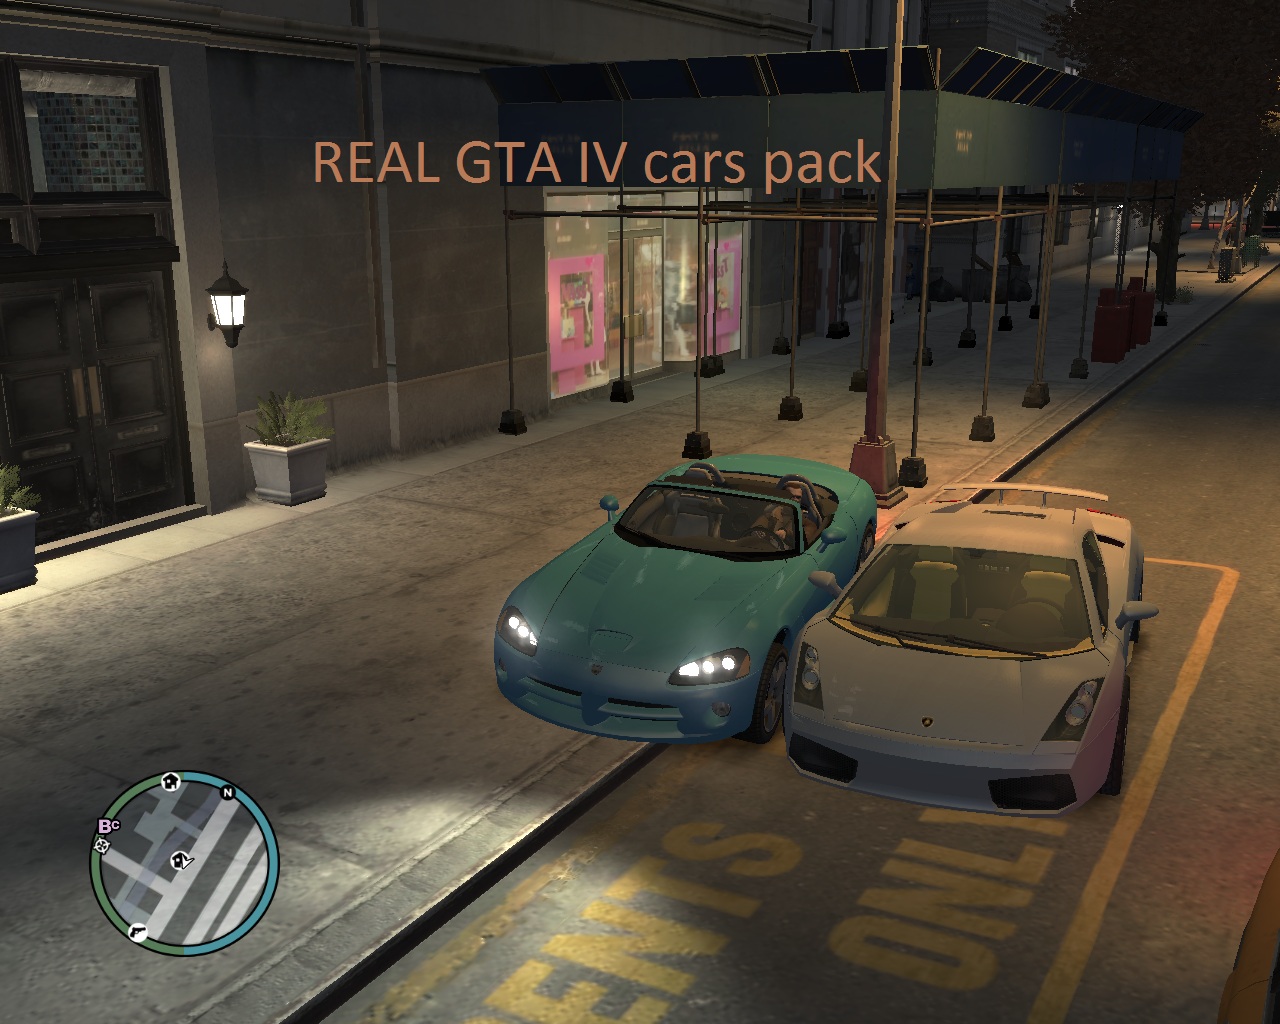 The Real GTA IV cars pack mod for Grand Theft Auto IV - Mod DB